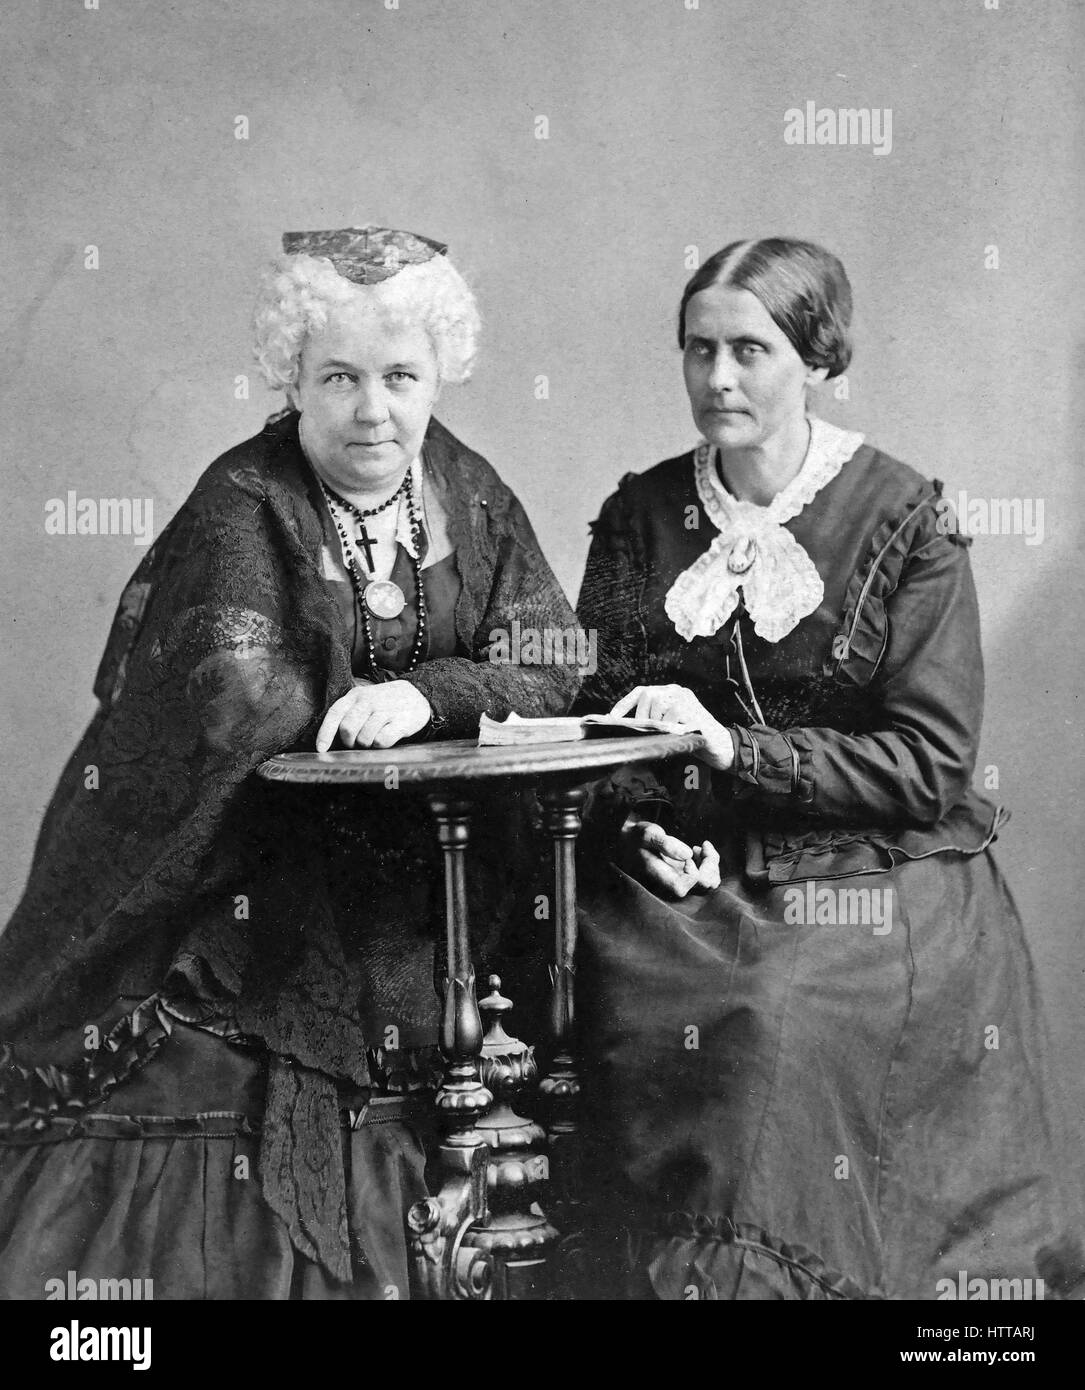 ELIZABETH CADY STANTON at left with fellow American social reformer Susan B. Anthony about 1870 Stock Photo